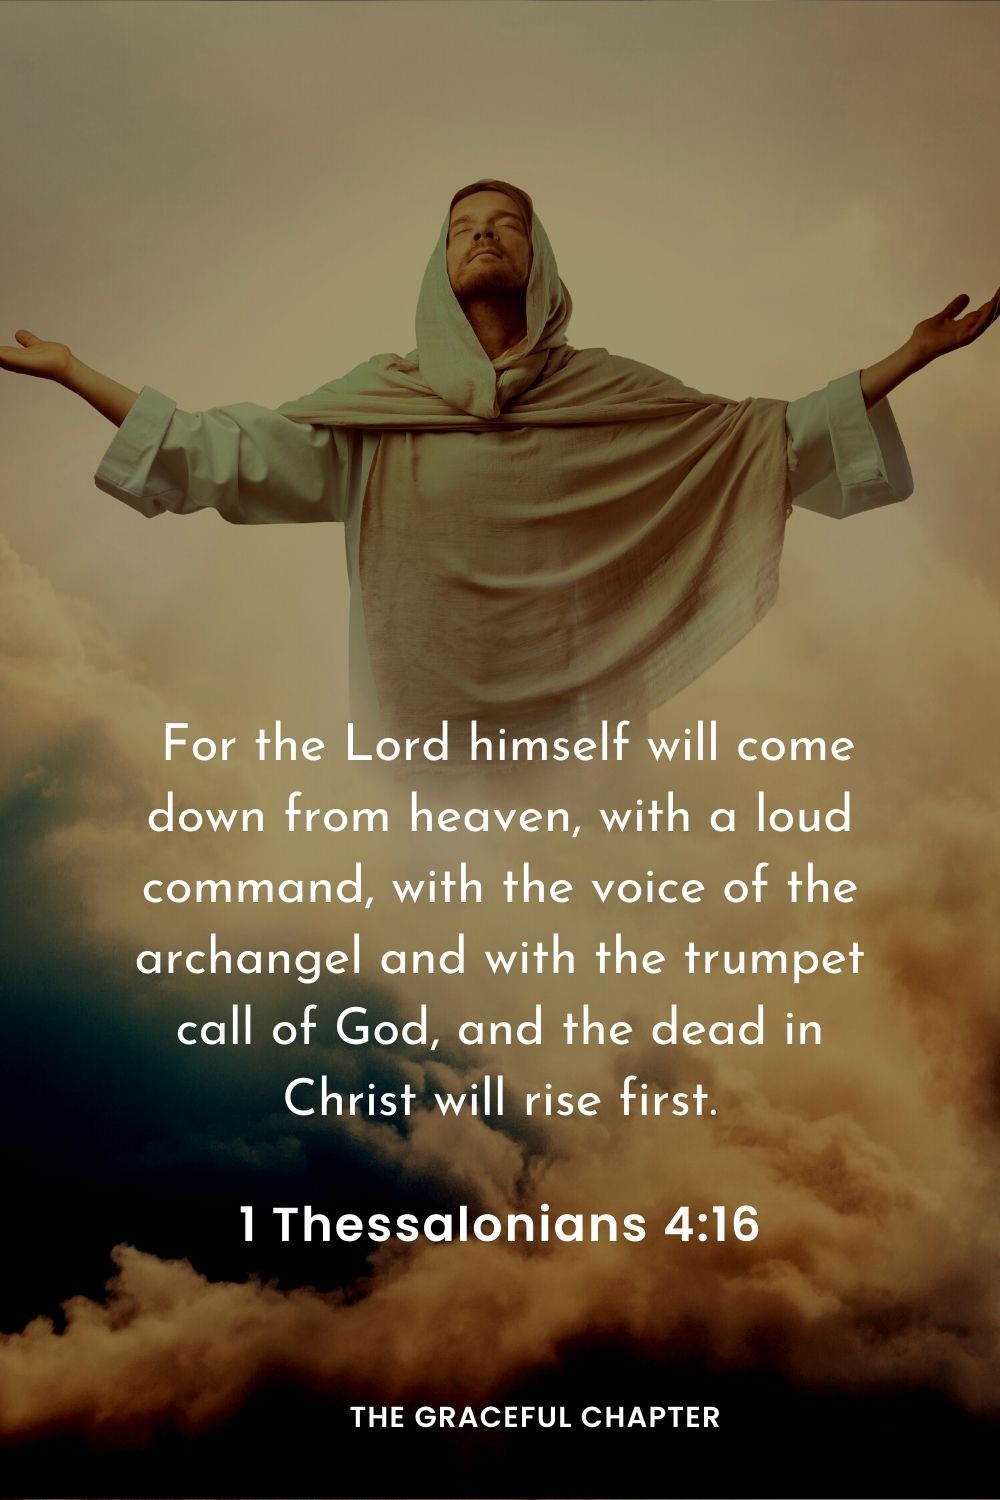  For the Lord himself will come down from heaven, with a loud command, with the voice of the archangel and with the trumpet call of God, and the dead in Christ will rise first.